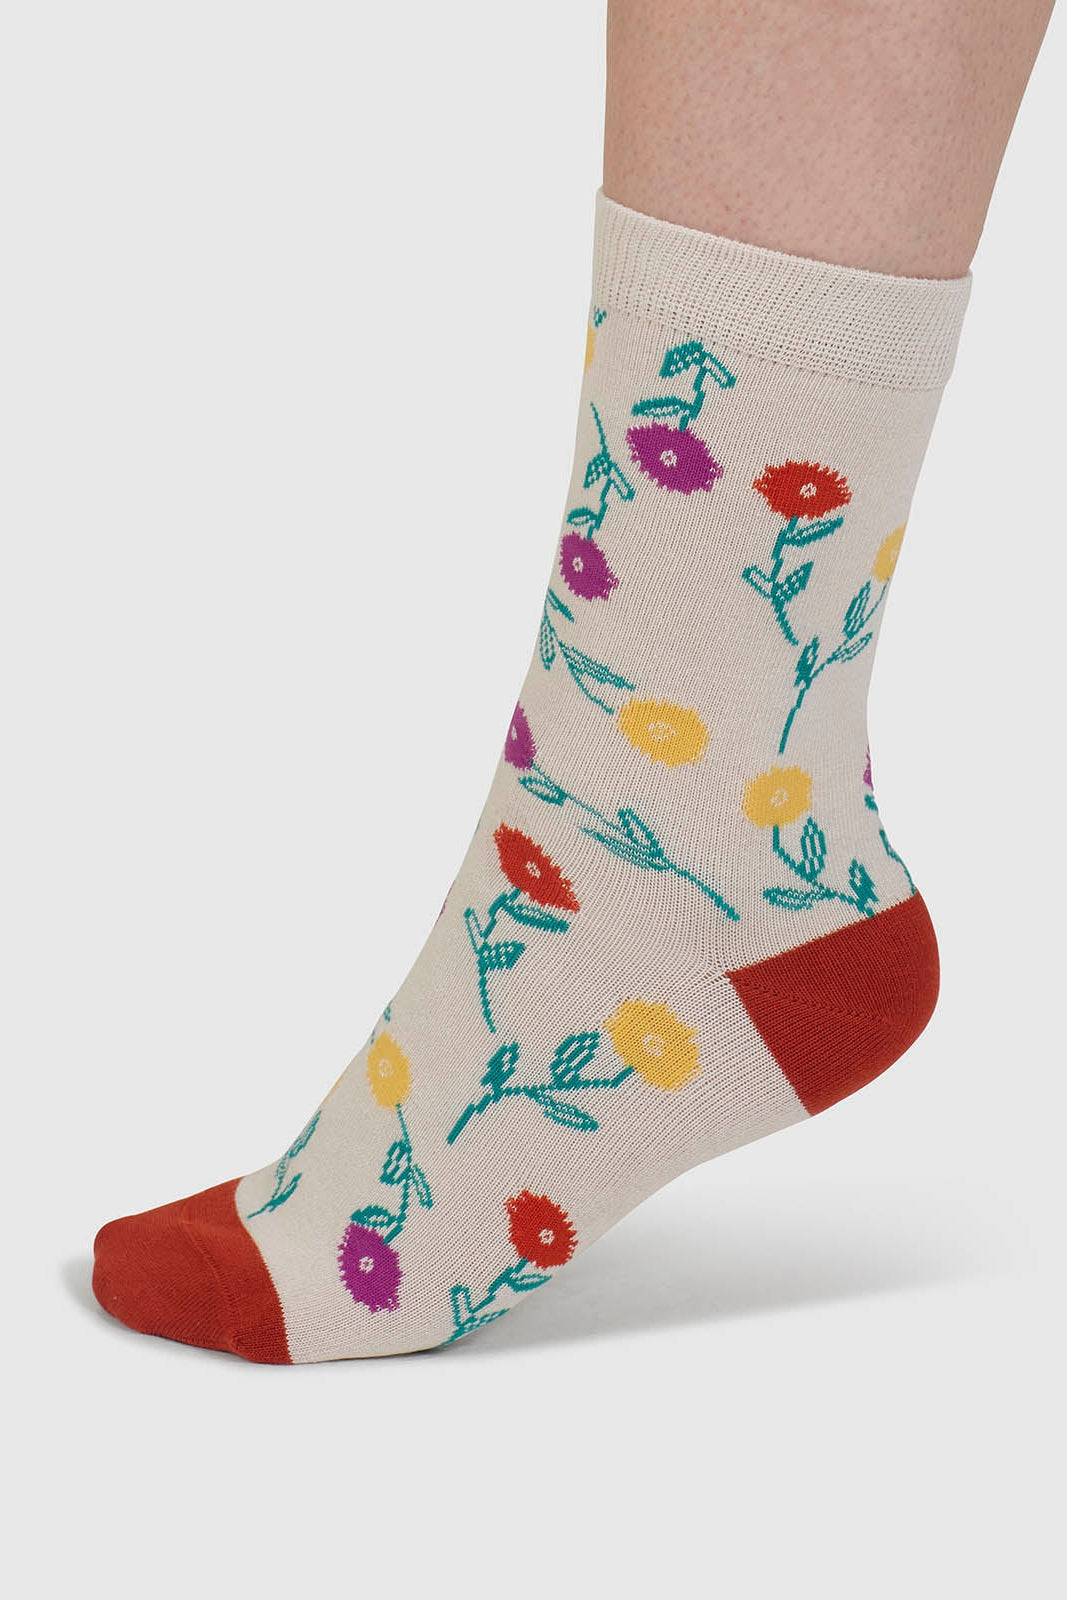 Thought Flavia Floral Bamboo 4 Pack Sock Box-Womens-Ohh! By Gum - Shop Sustainable